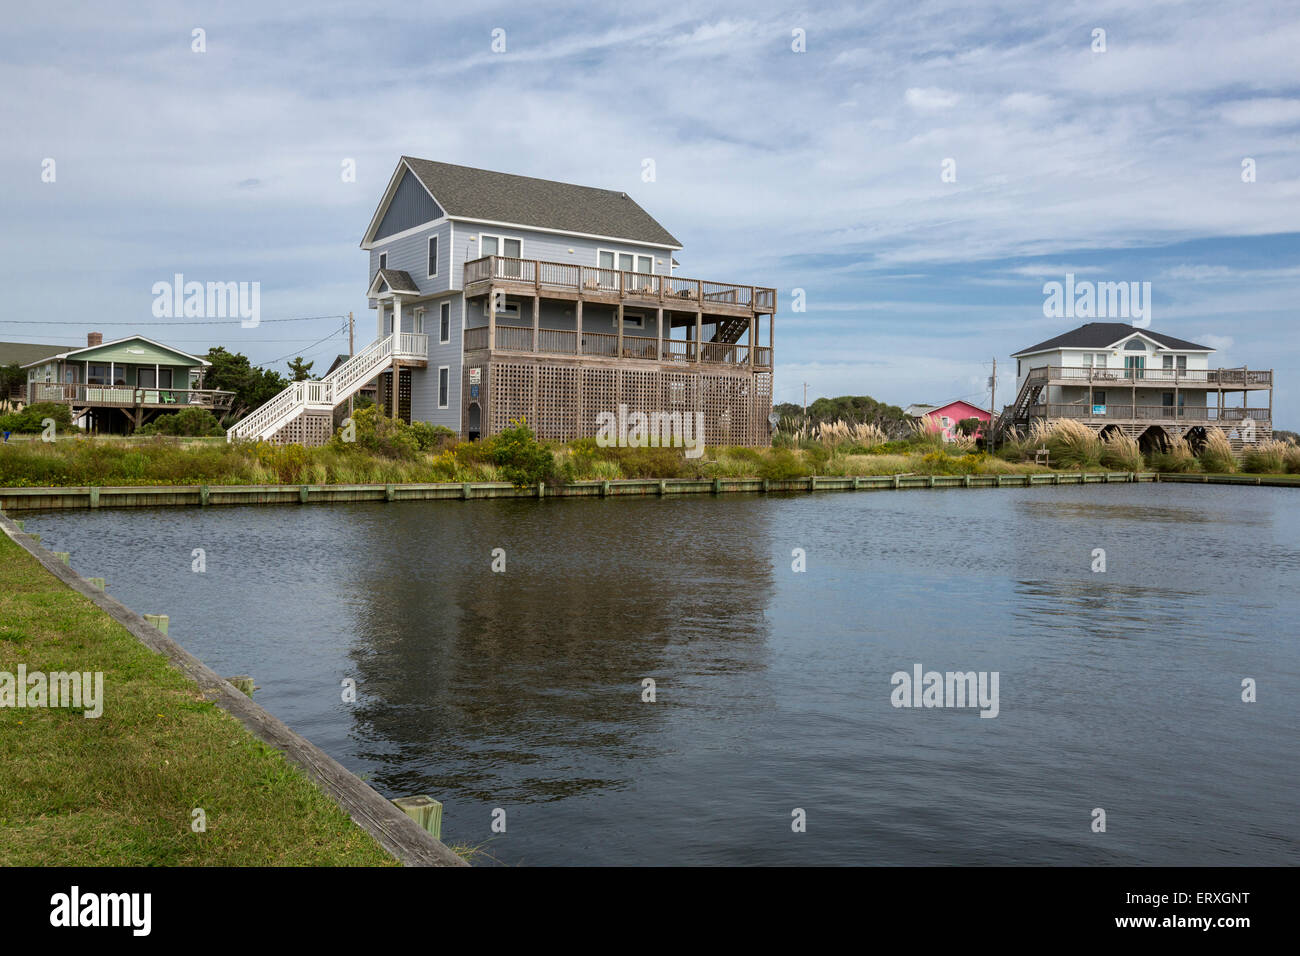 Outer Banks, Hatteras Village, North Carolina.  Vacation Houses, Living Areas Elevated to avoid Storm Surges. Stock Photo